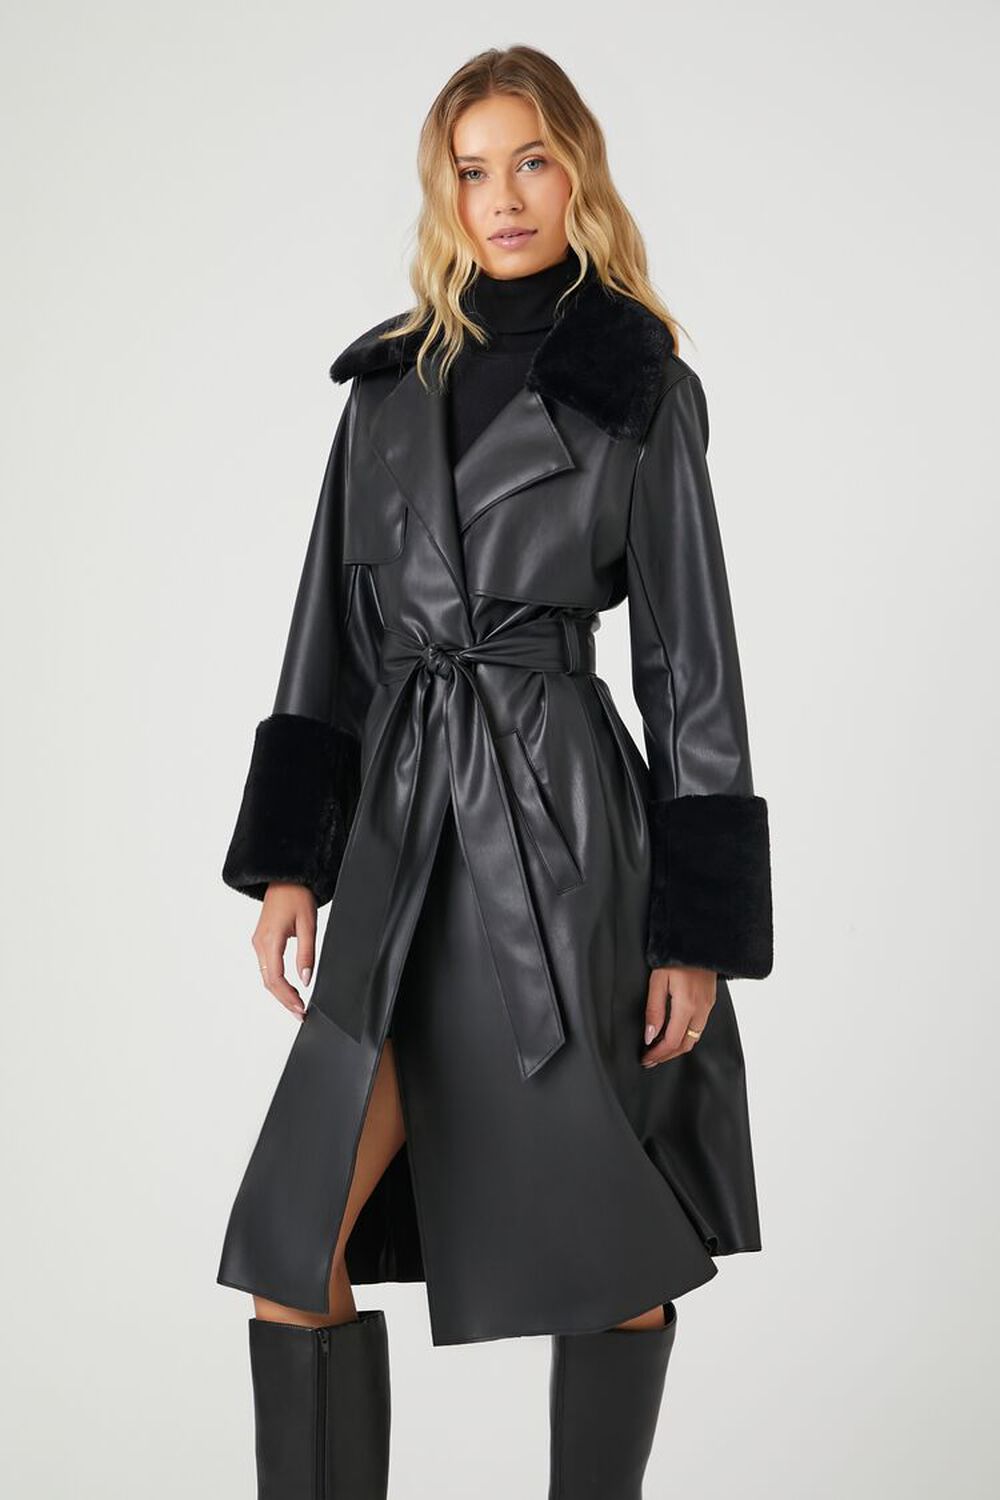 BLACK Faux Leather Belted Trench Coat, image 2